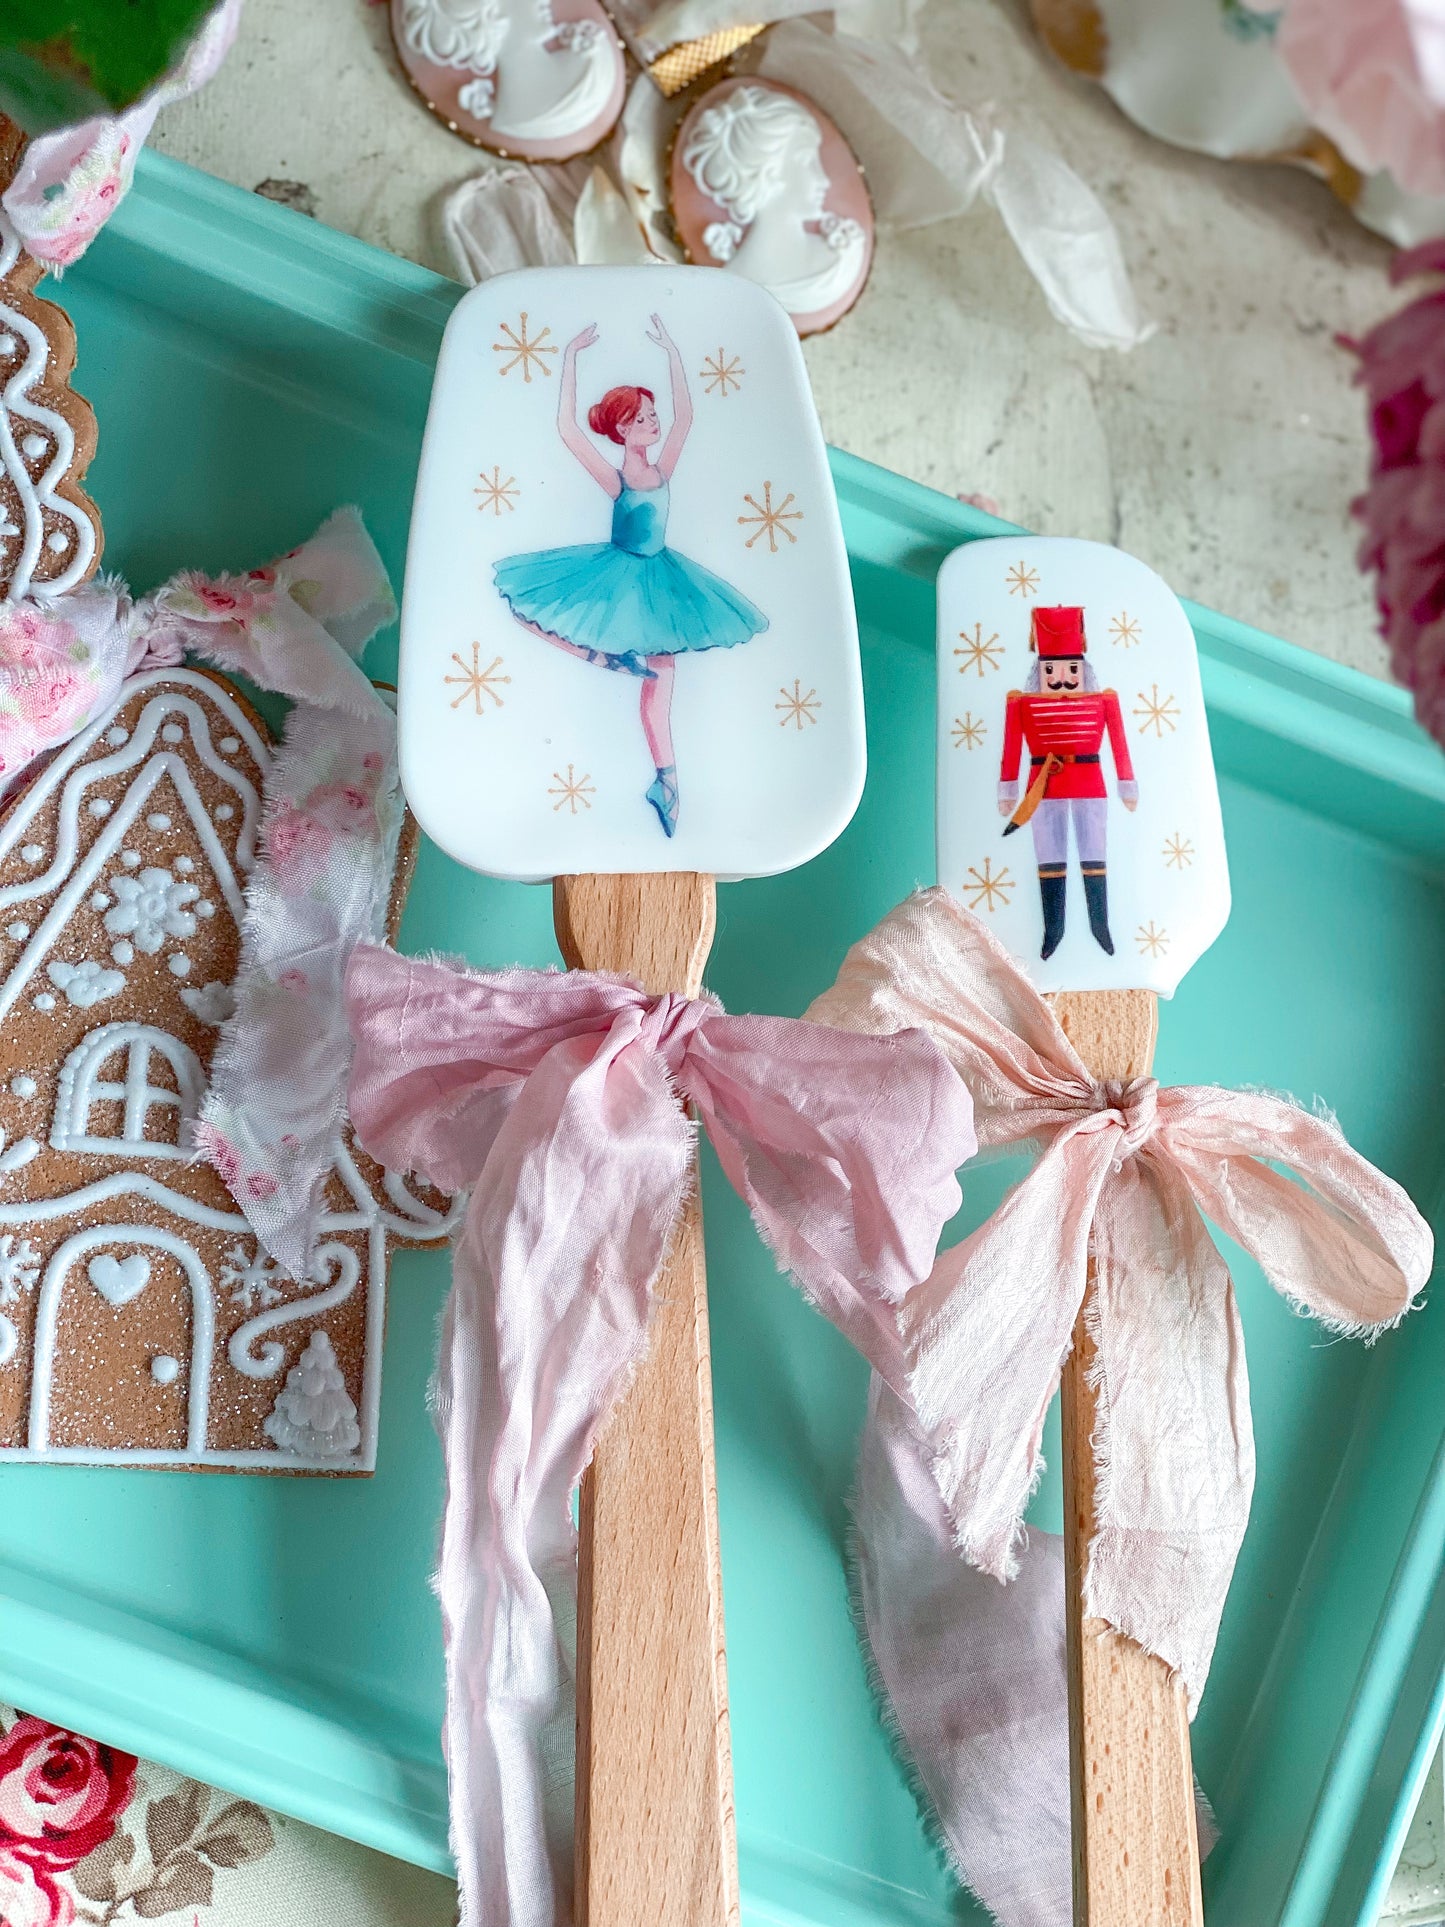 Teal Brownie Pan with Nutcracker and Ballerina Spatulas